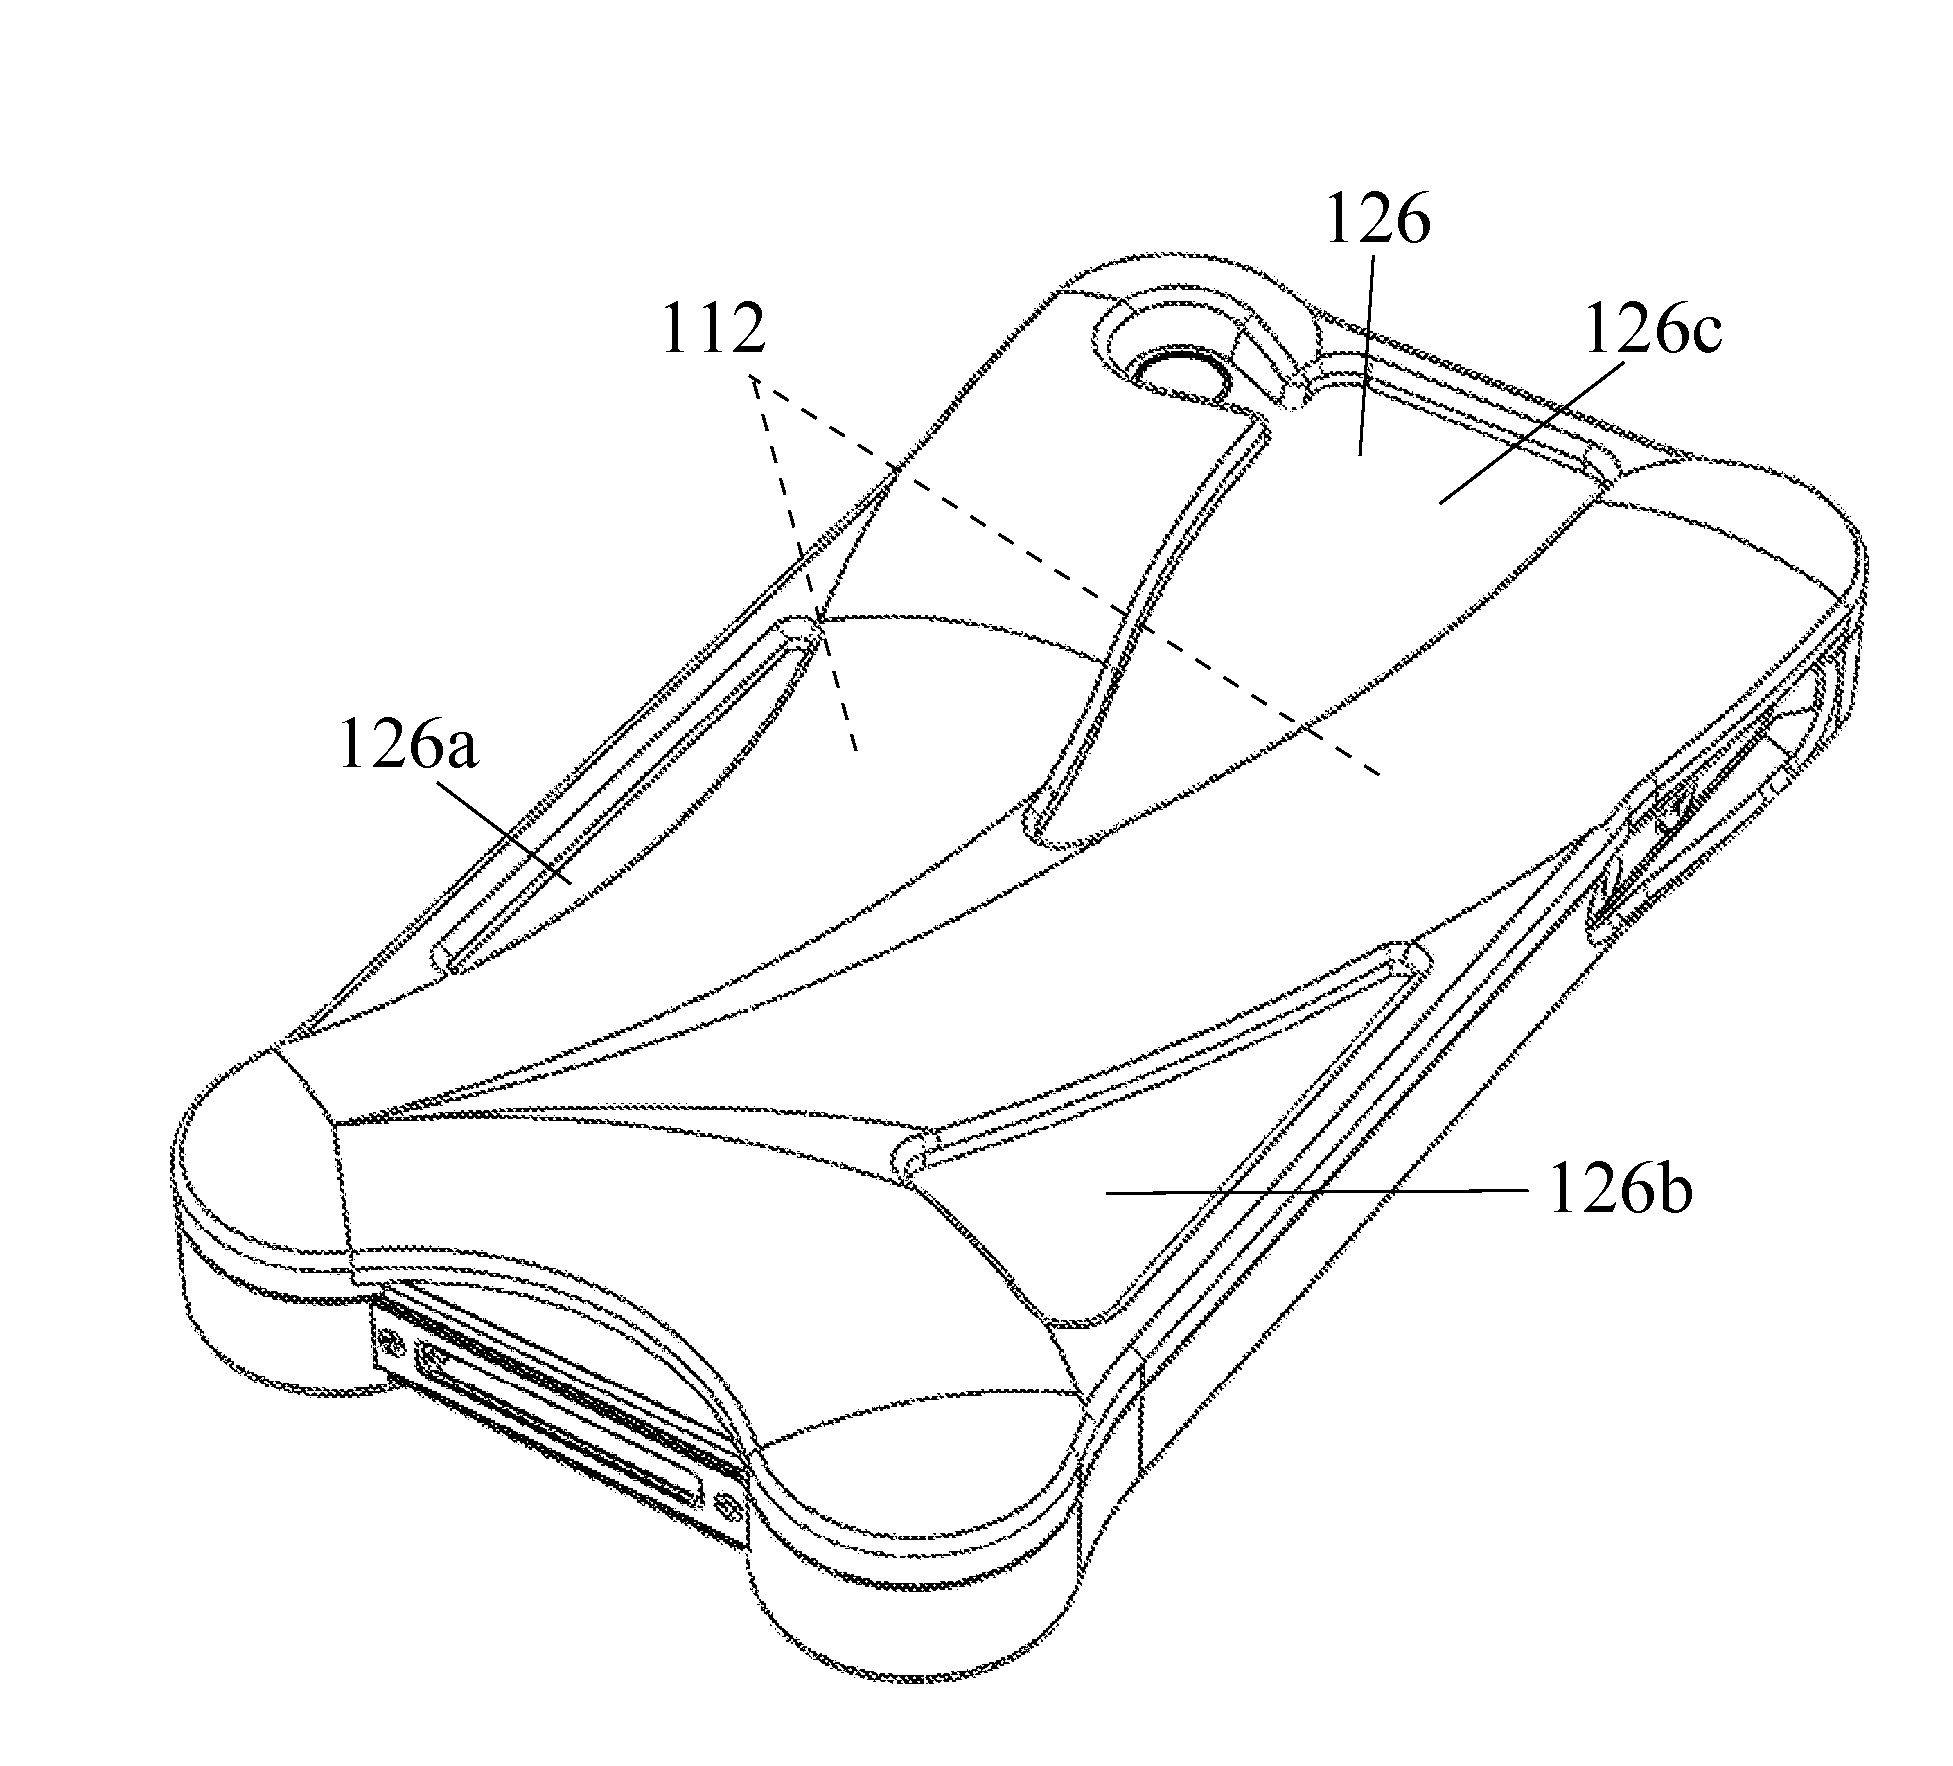 Cover for hand-held electronic device